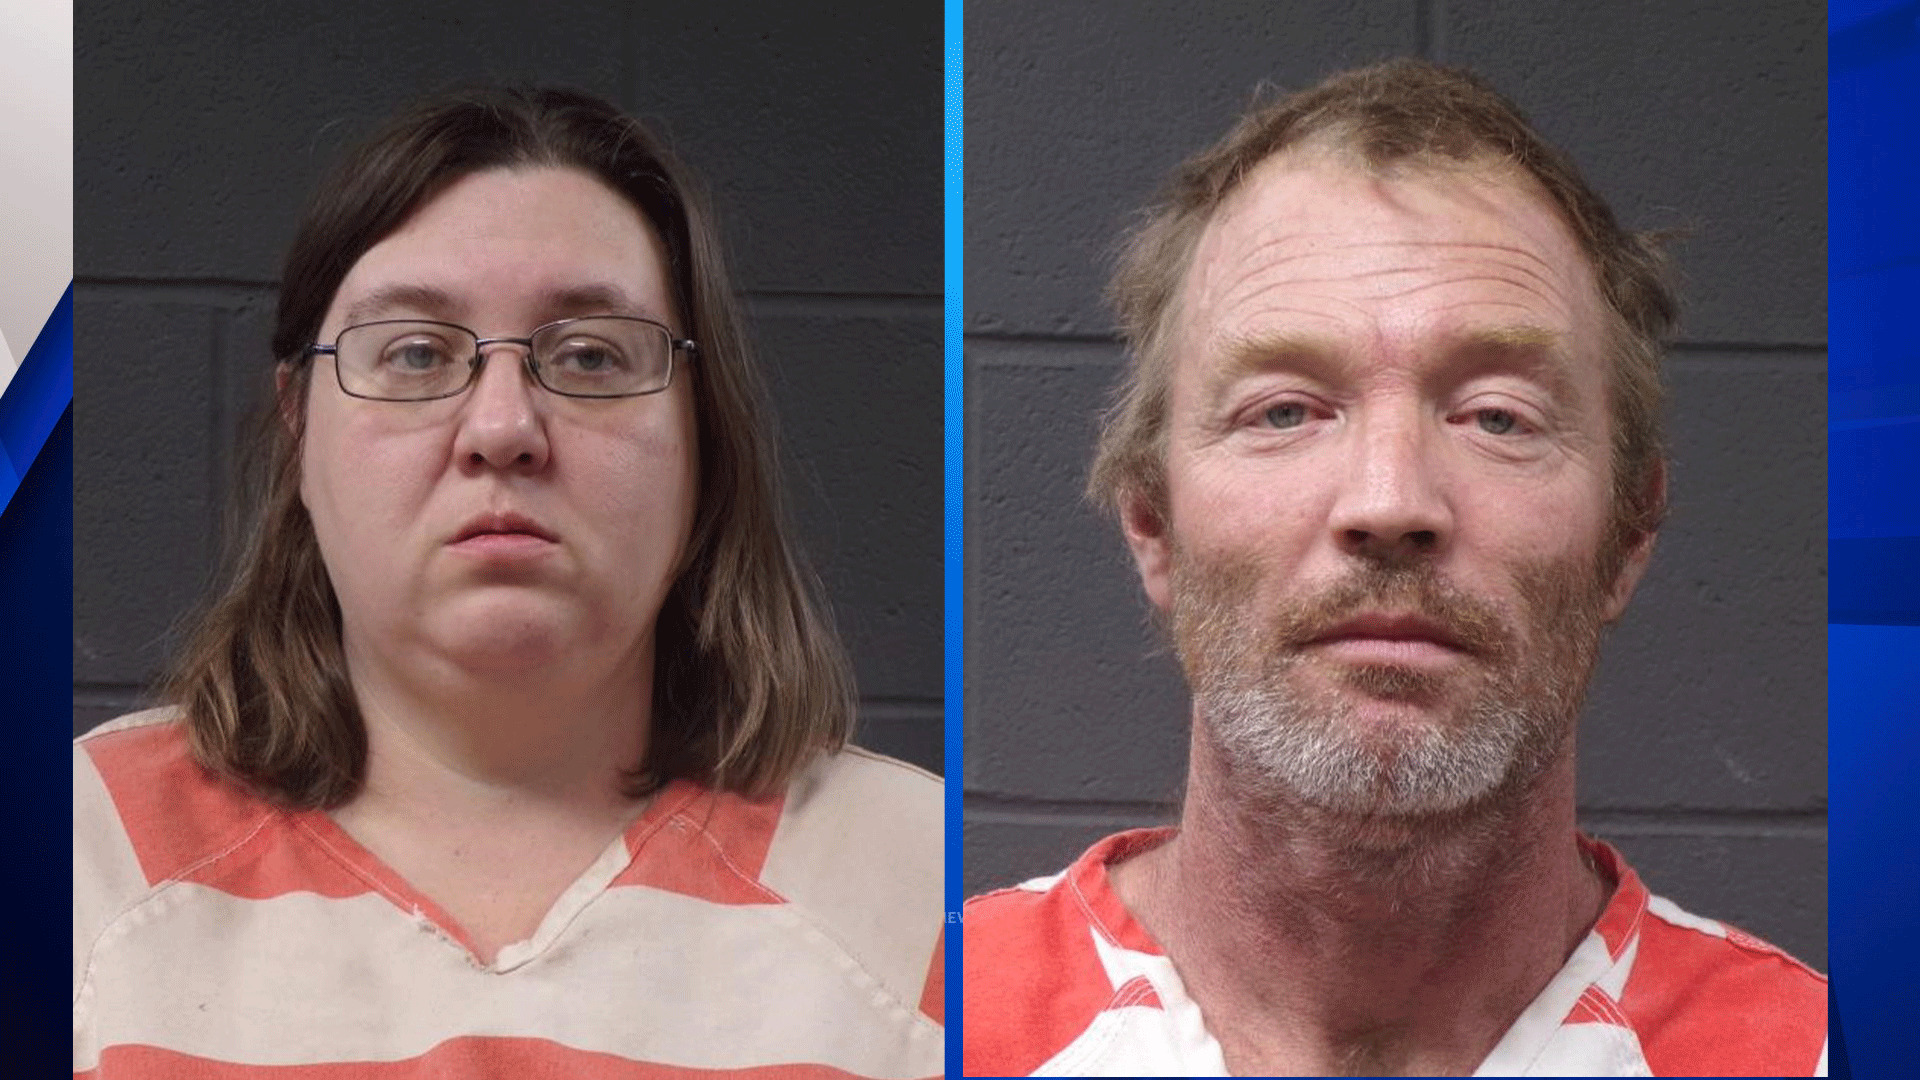 A Missouri woman has been accused of kidnapping and killing a pregnant stranger to steal her baby and her husband was involved in the crime. (Photo: Yahoo)